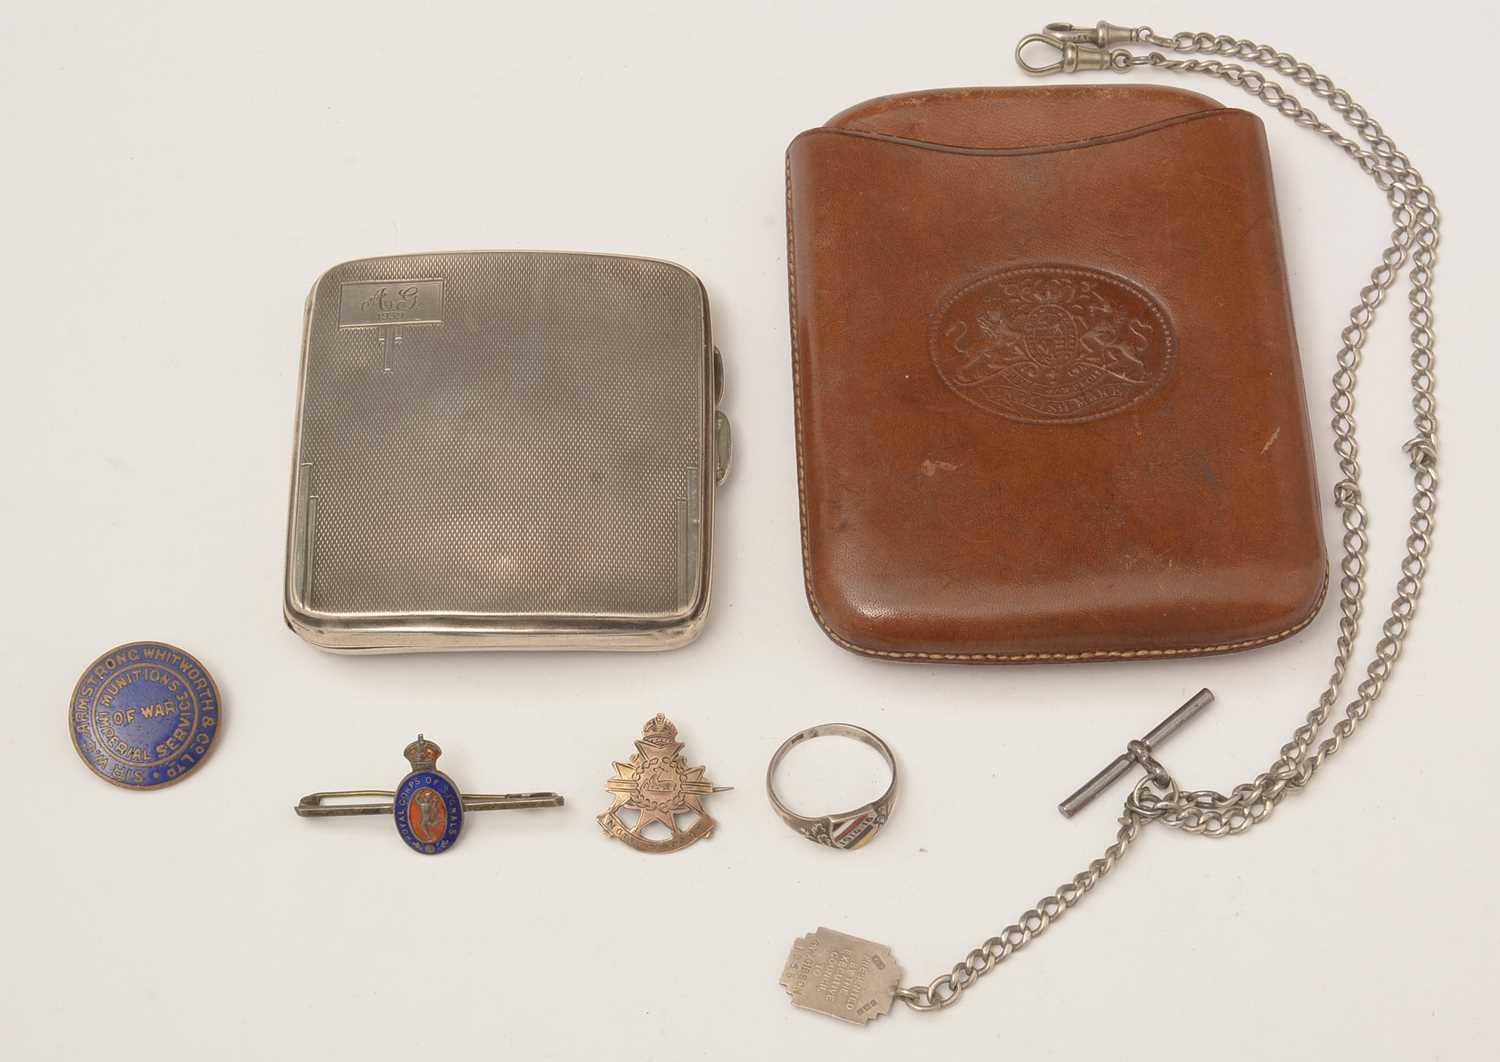 Lot 104 - Collectors' items including a silver cigarette case and military sweetheart brooches.